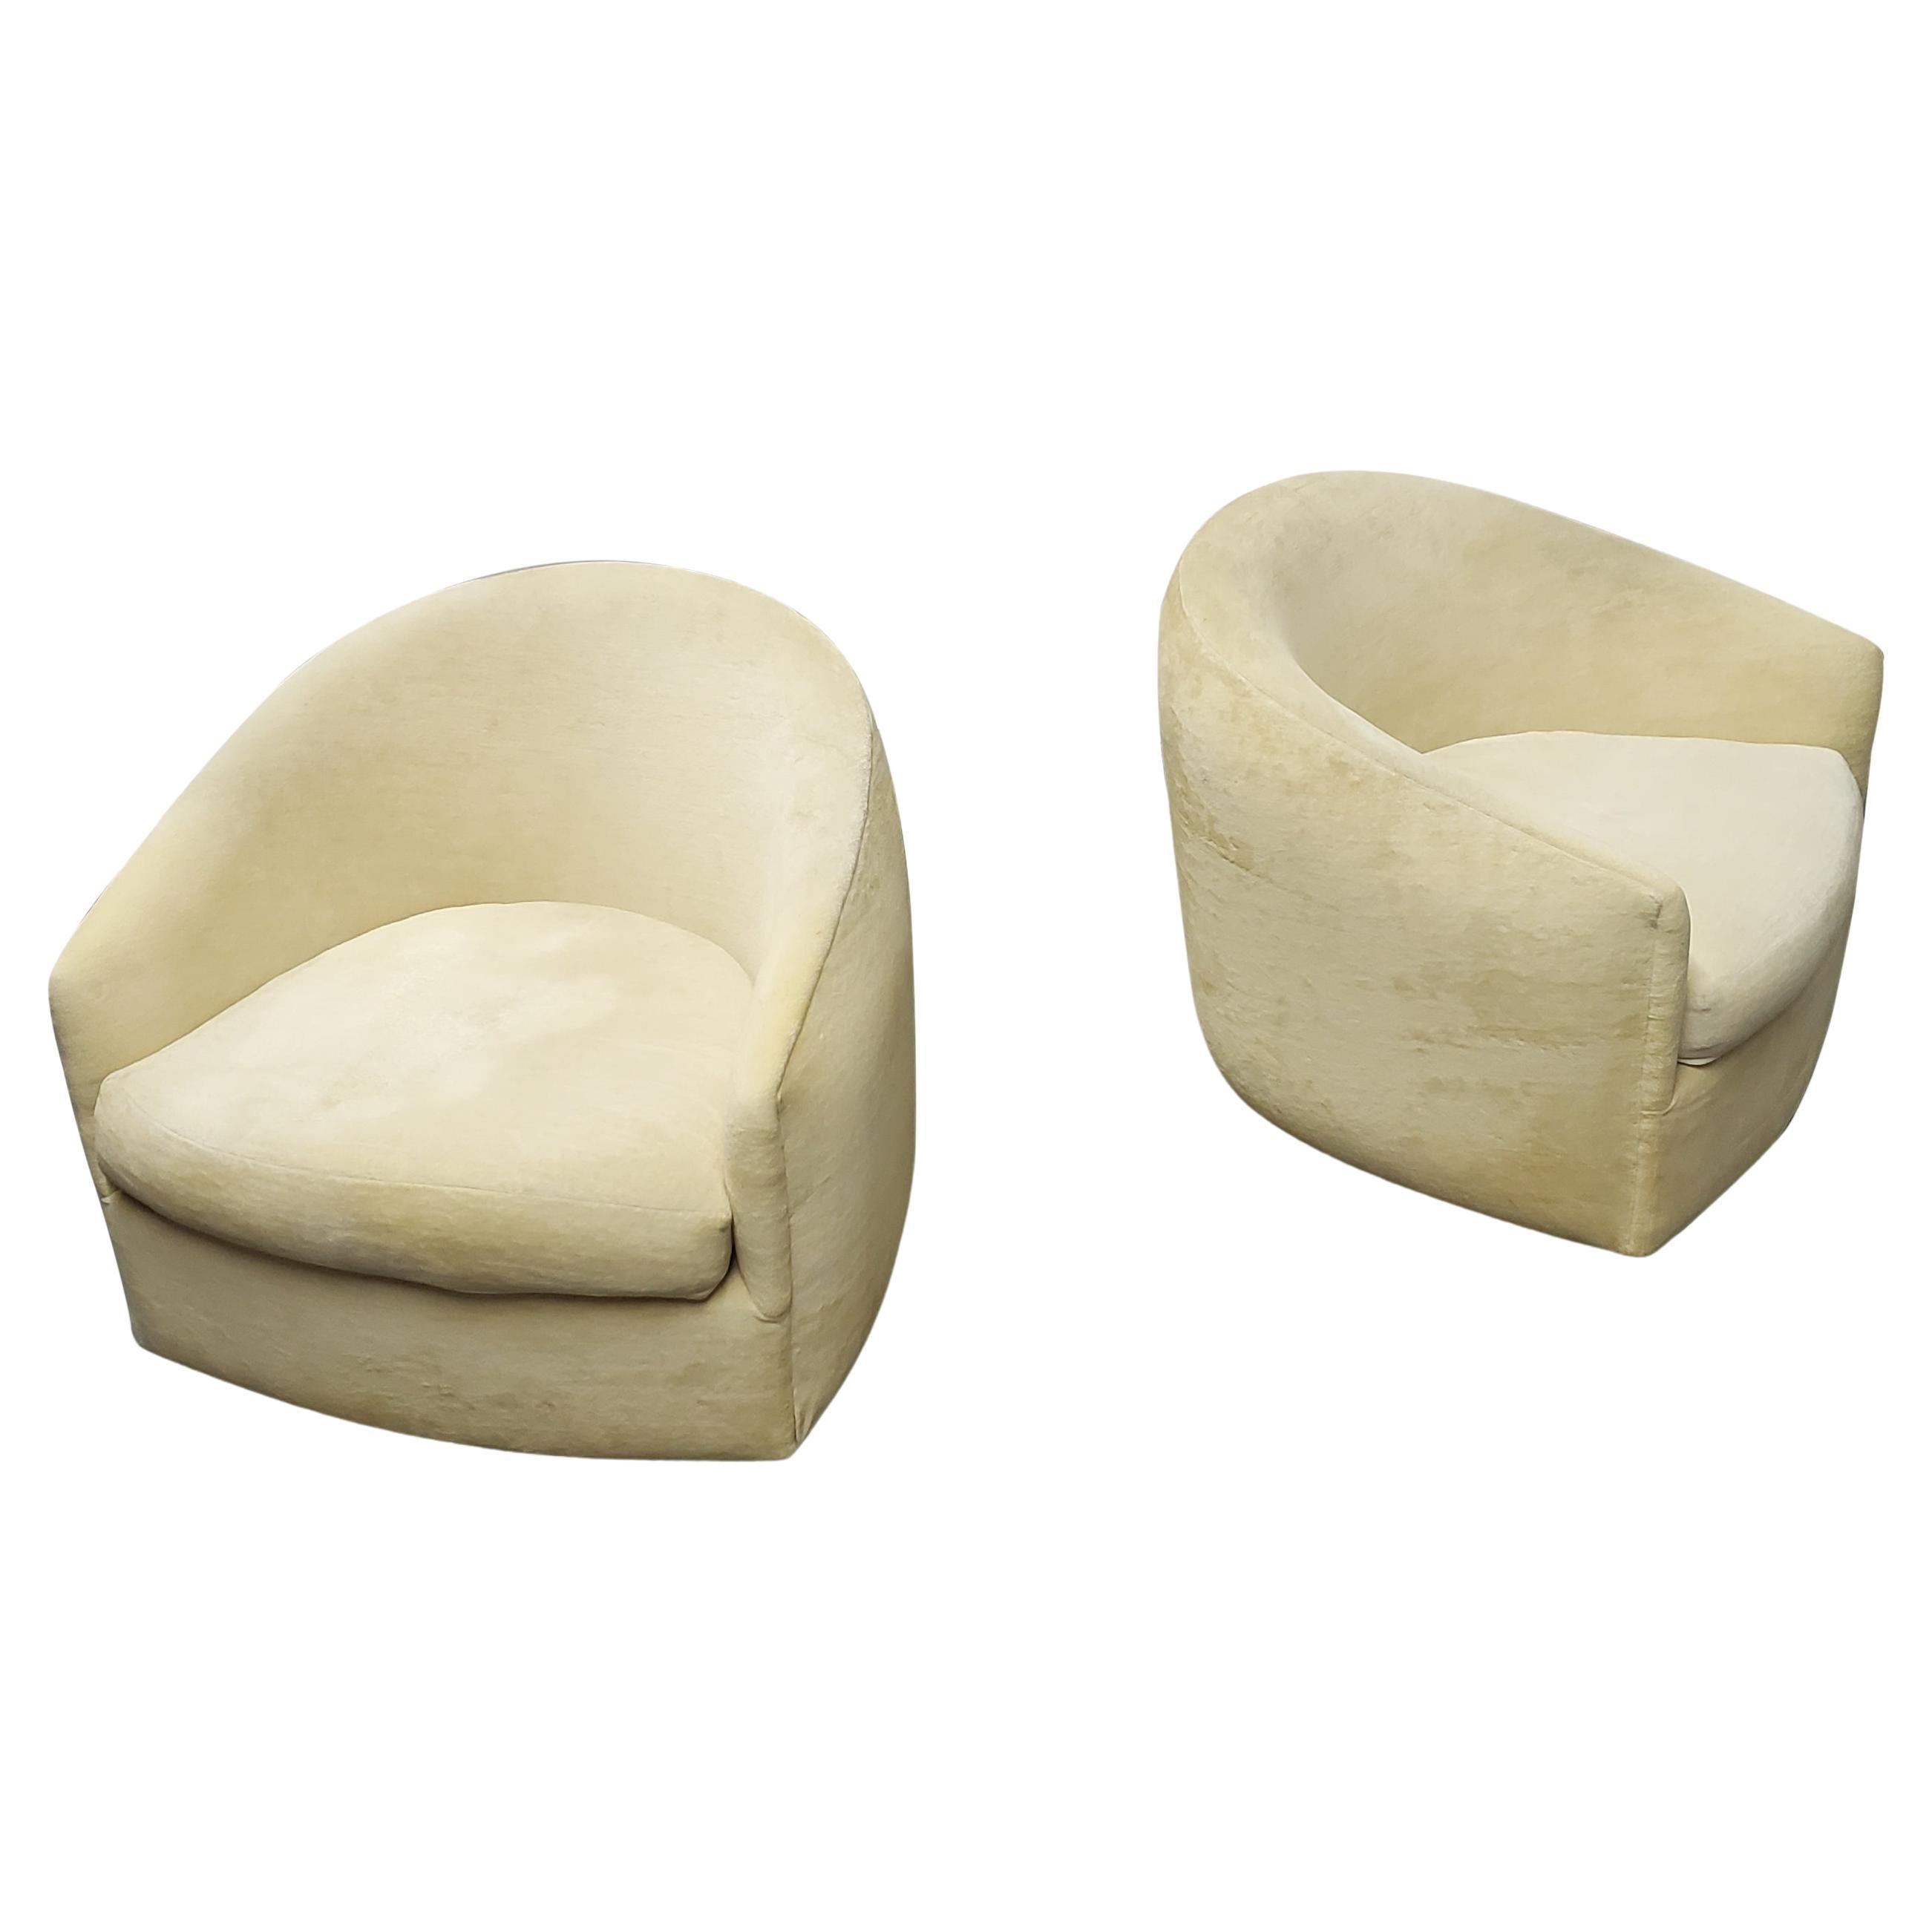 Pair of Adrian Pearsall Swivel / tilt lounge chairs.